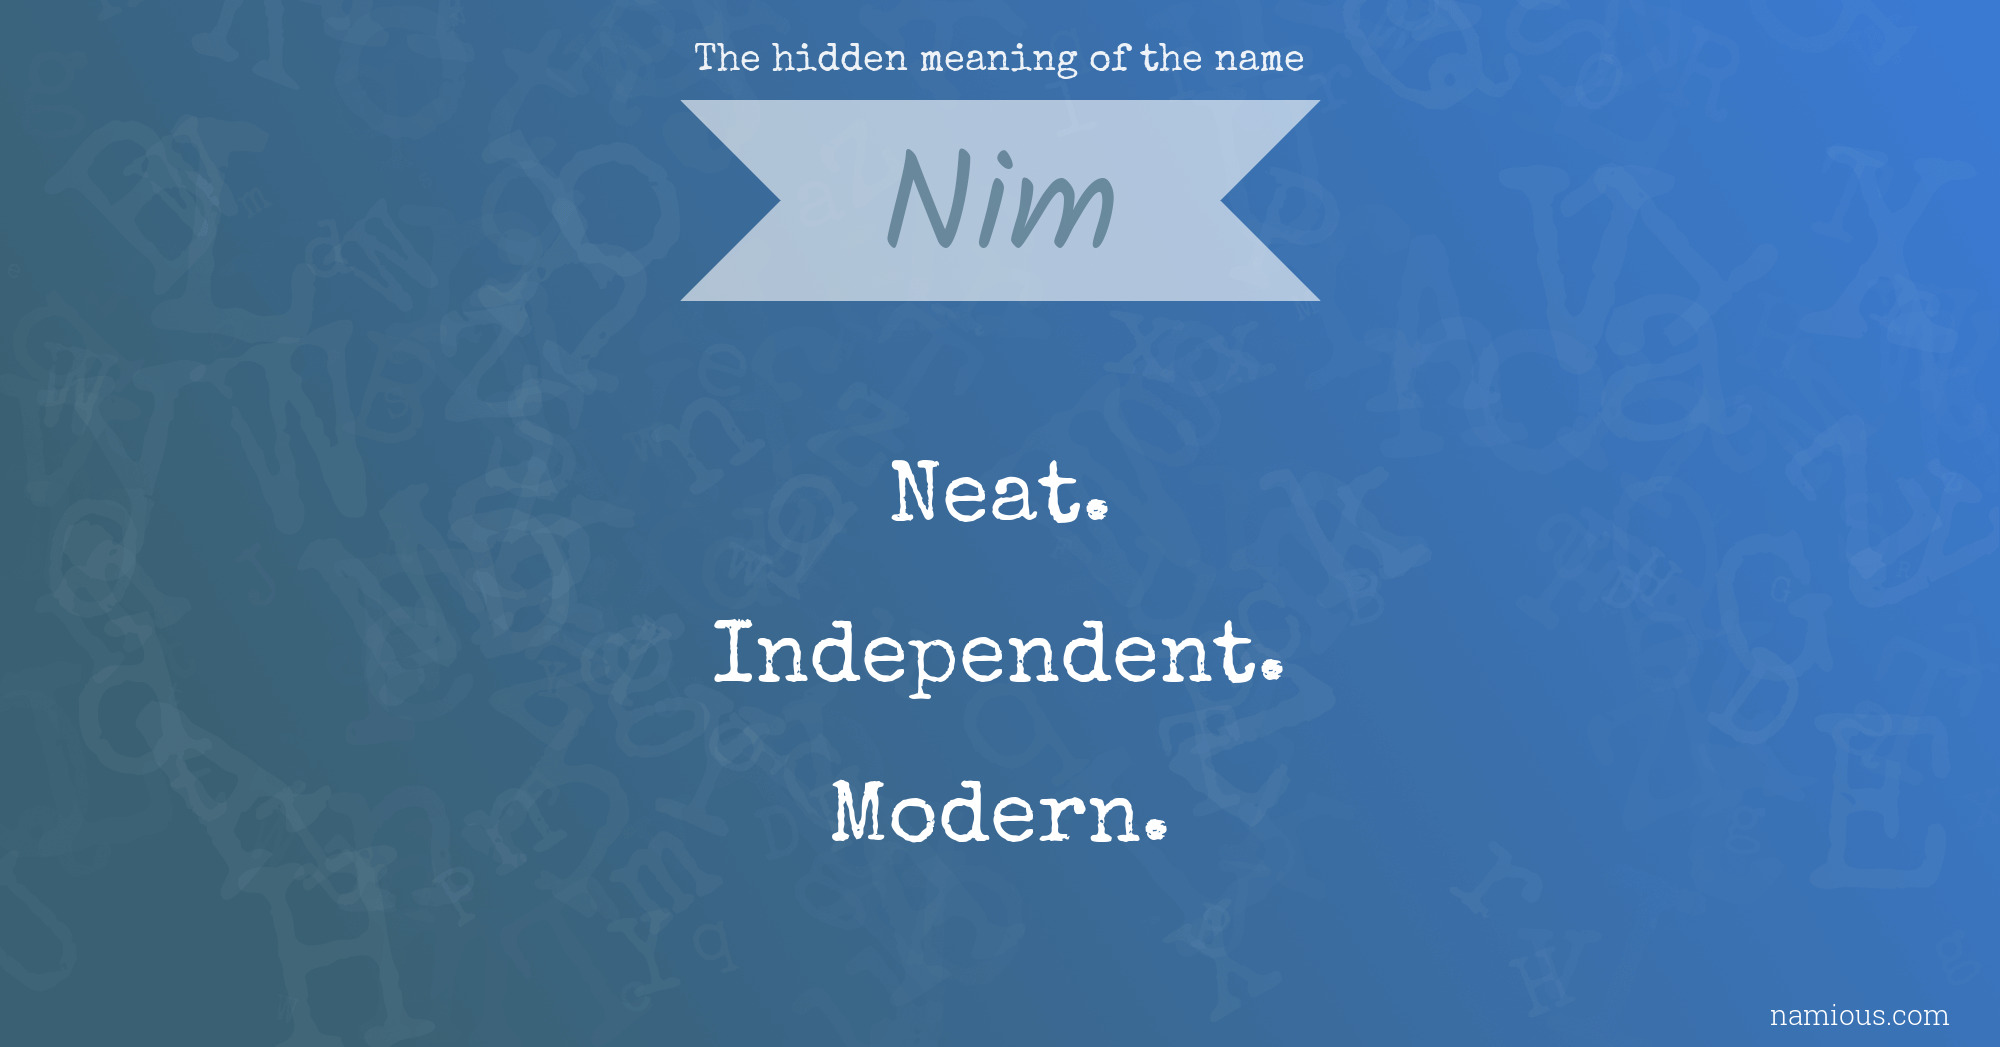 The hidden meaning of the name Nim